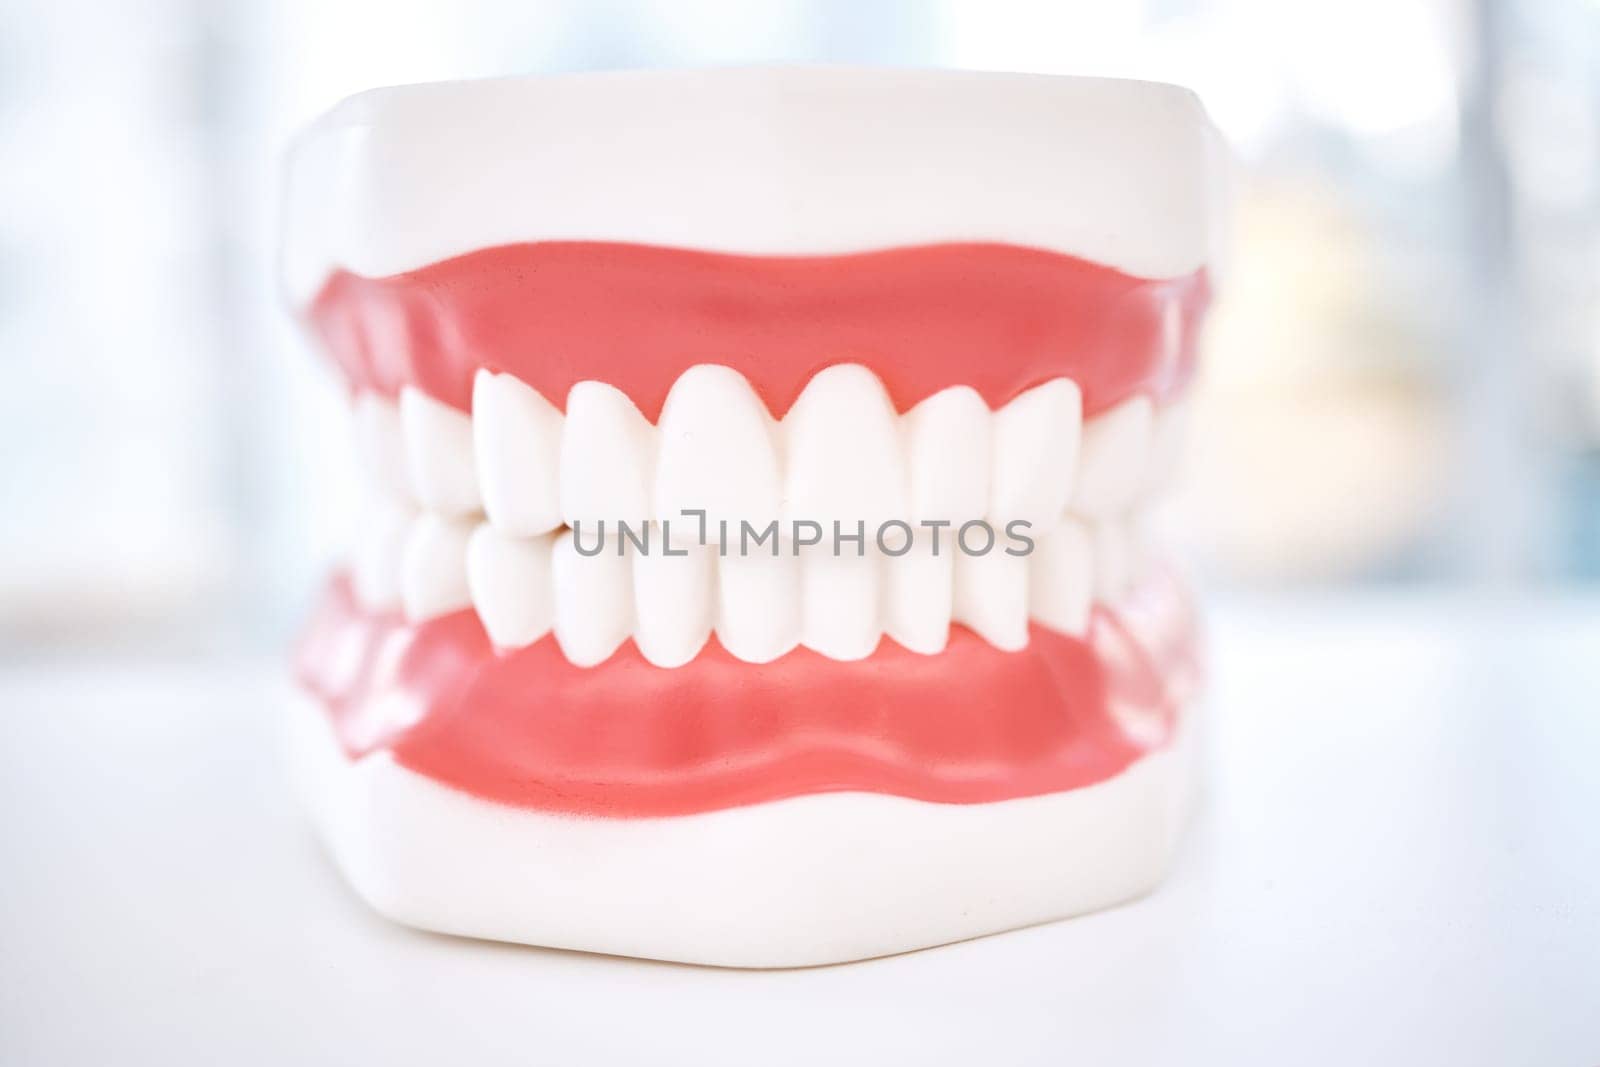 Dental, teeth model and orthodontics with healthcare and closeup, oral hygienist and health insurance. Veneers, dentistry equipment and healthy gums with fresh breath, medical and tooth care.